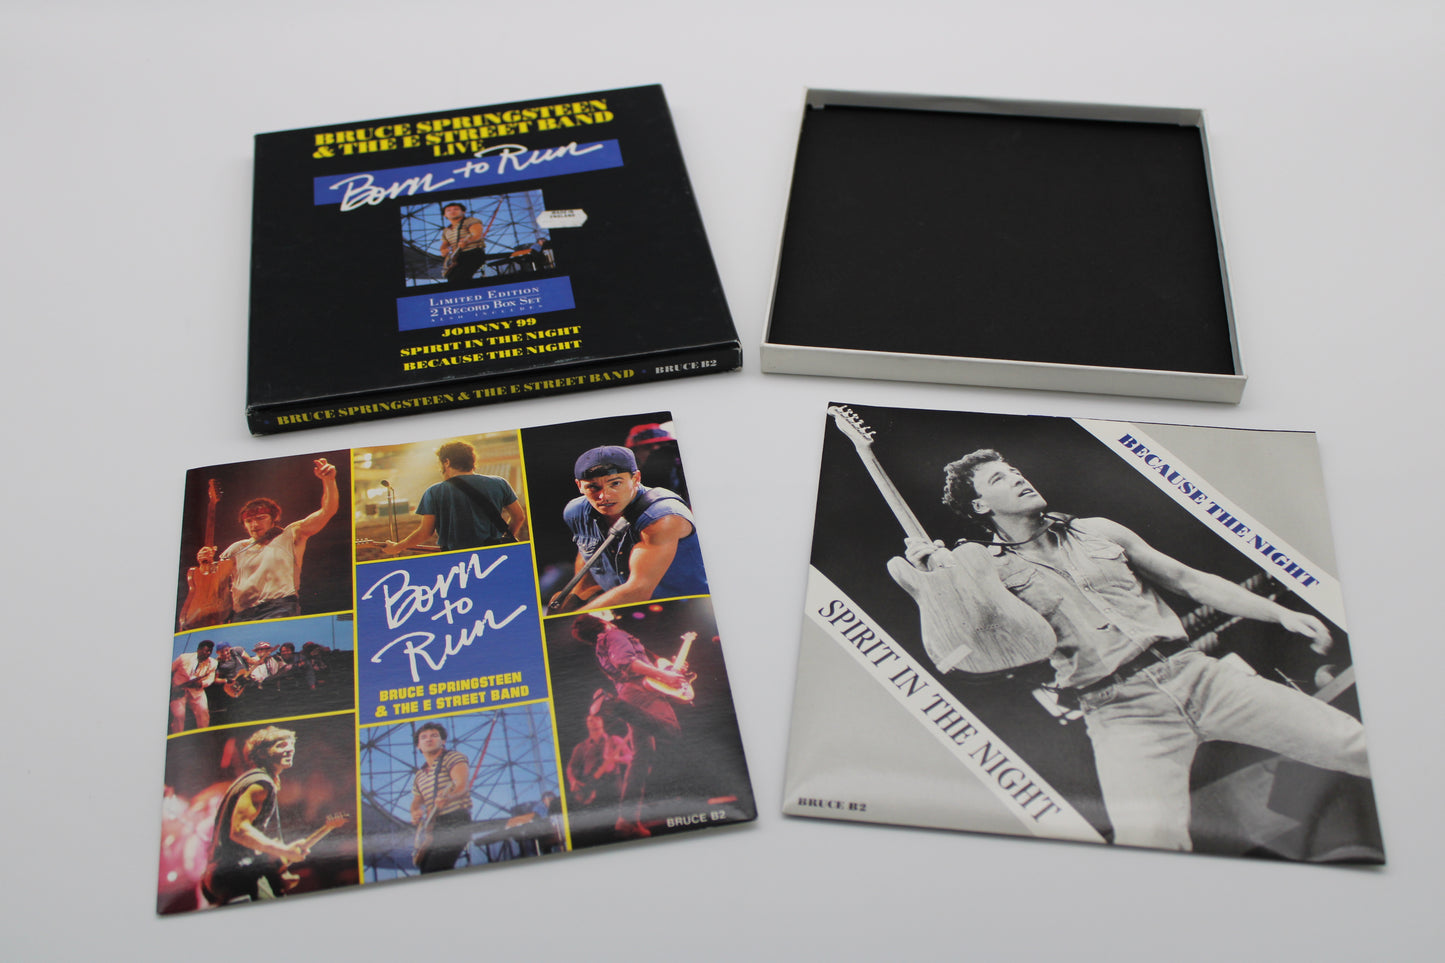 Bruce Springsteen Born to Run Collectible Box 45 records + picture sleeves - Import Vinyl